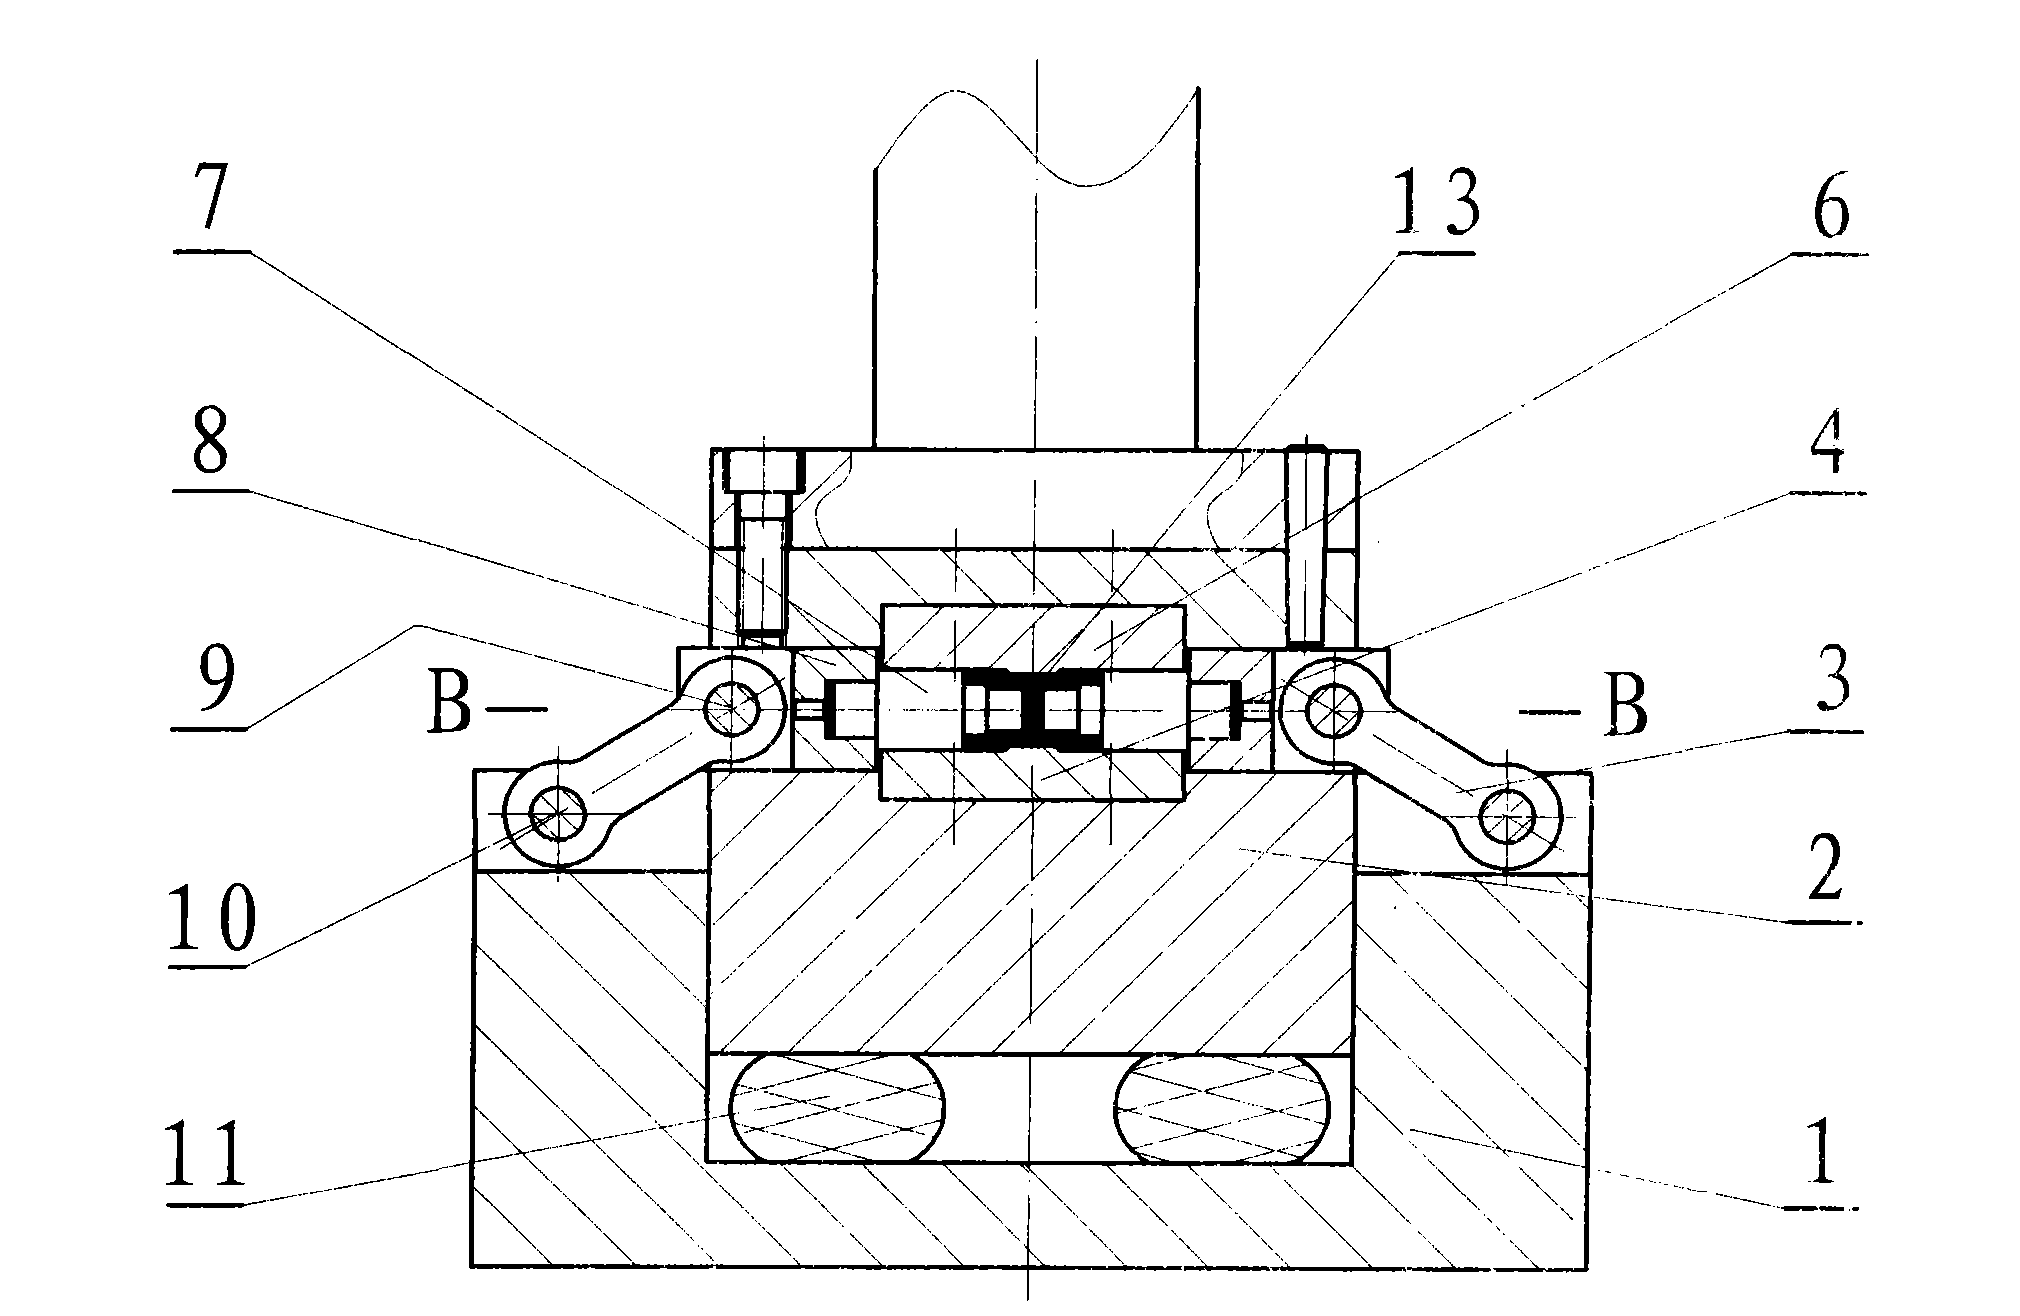 Novel movement recoil type hot extrusion forming and processing method